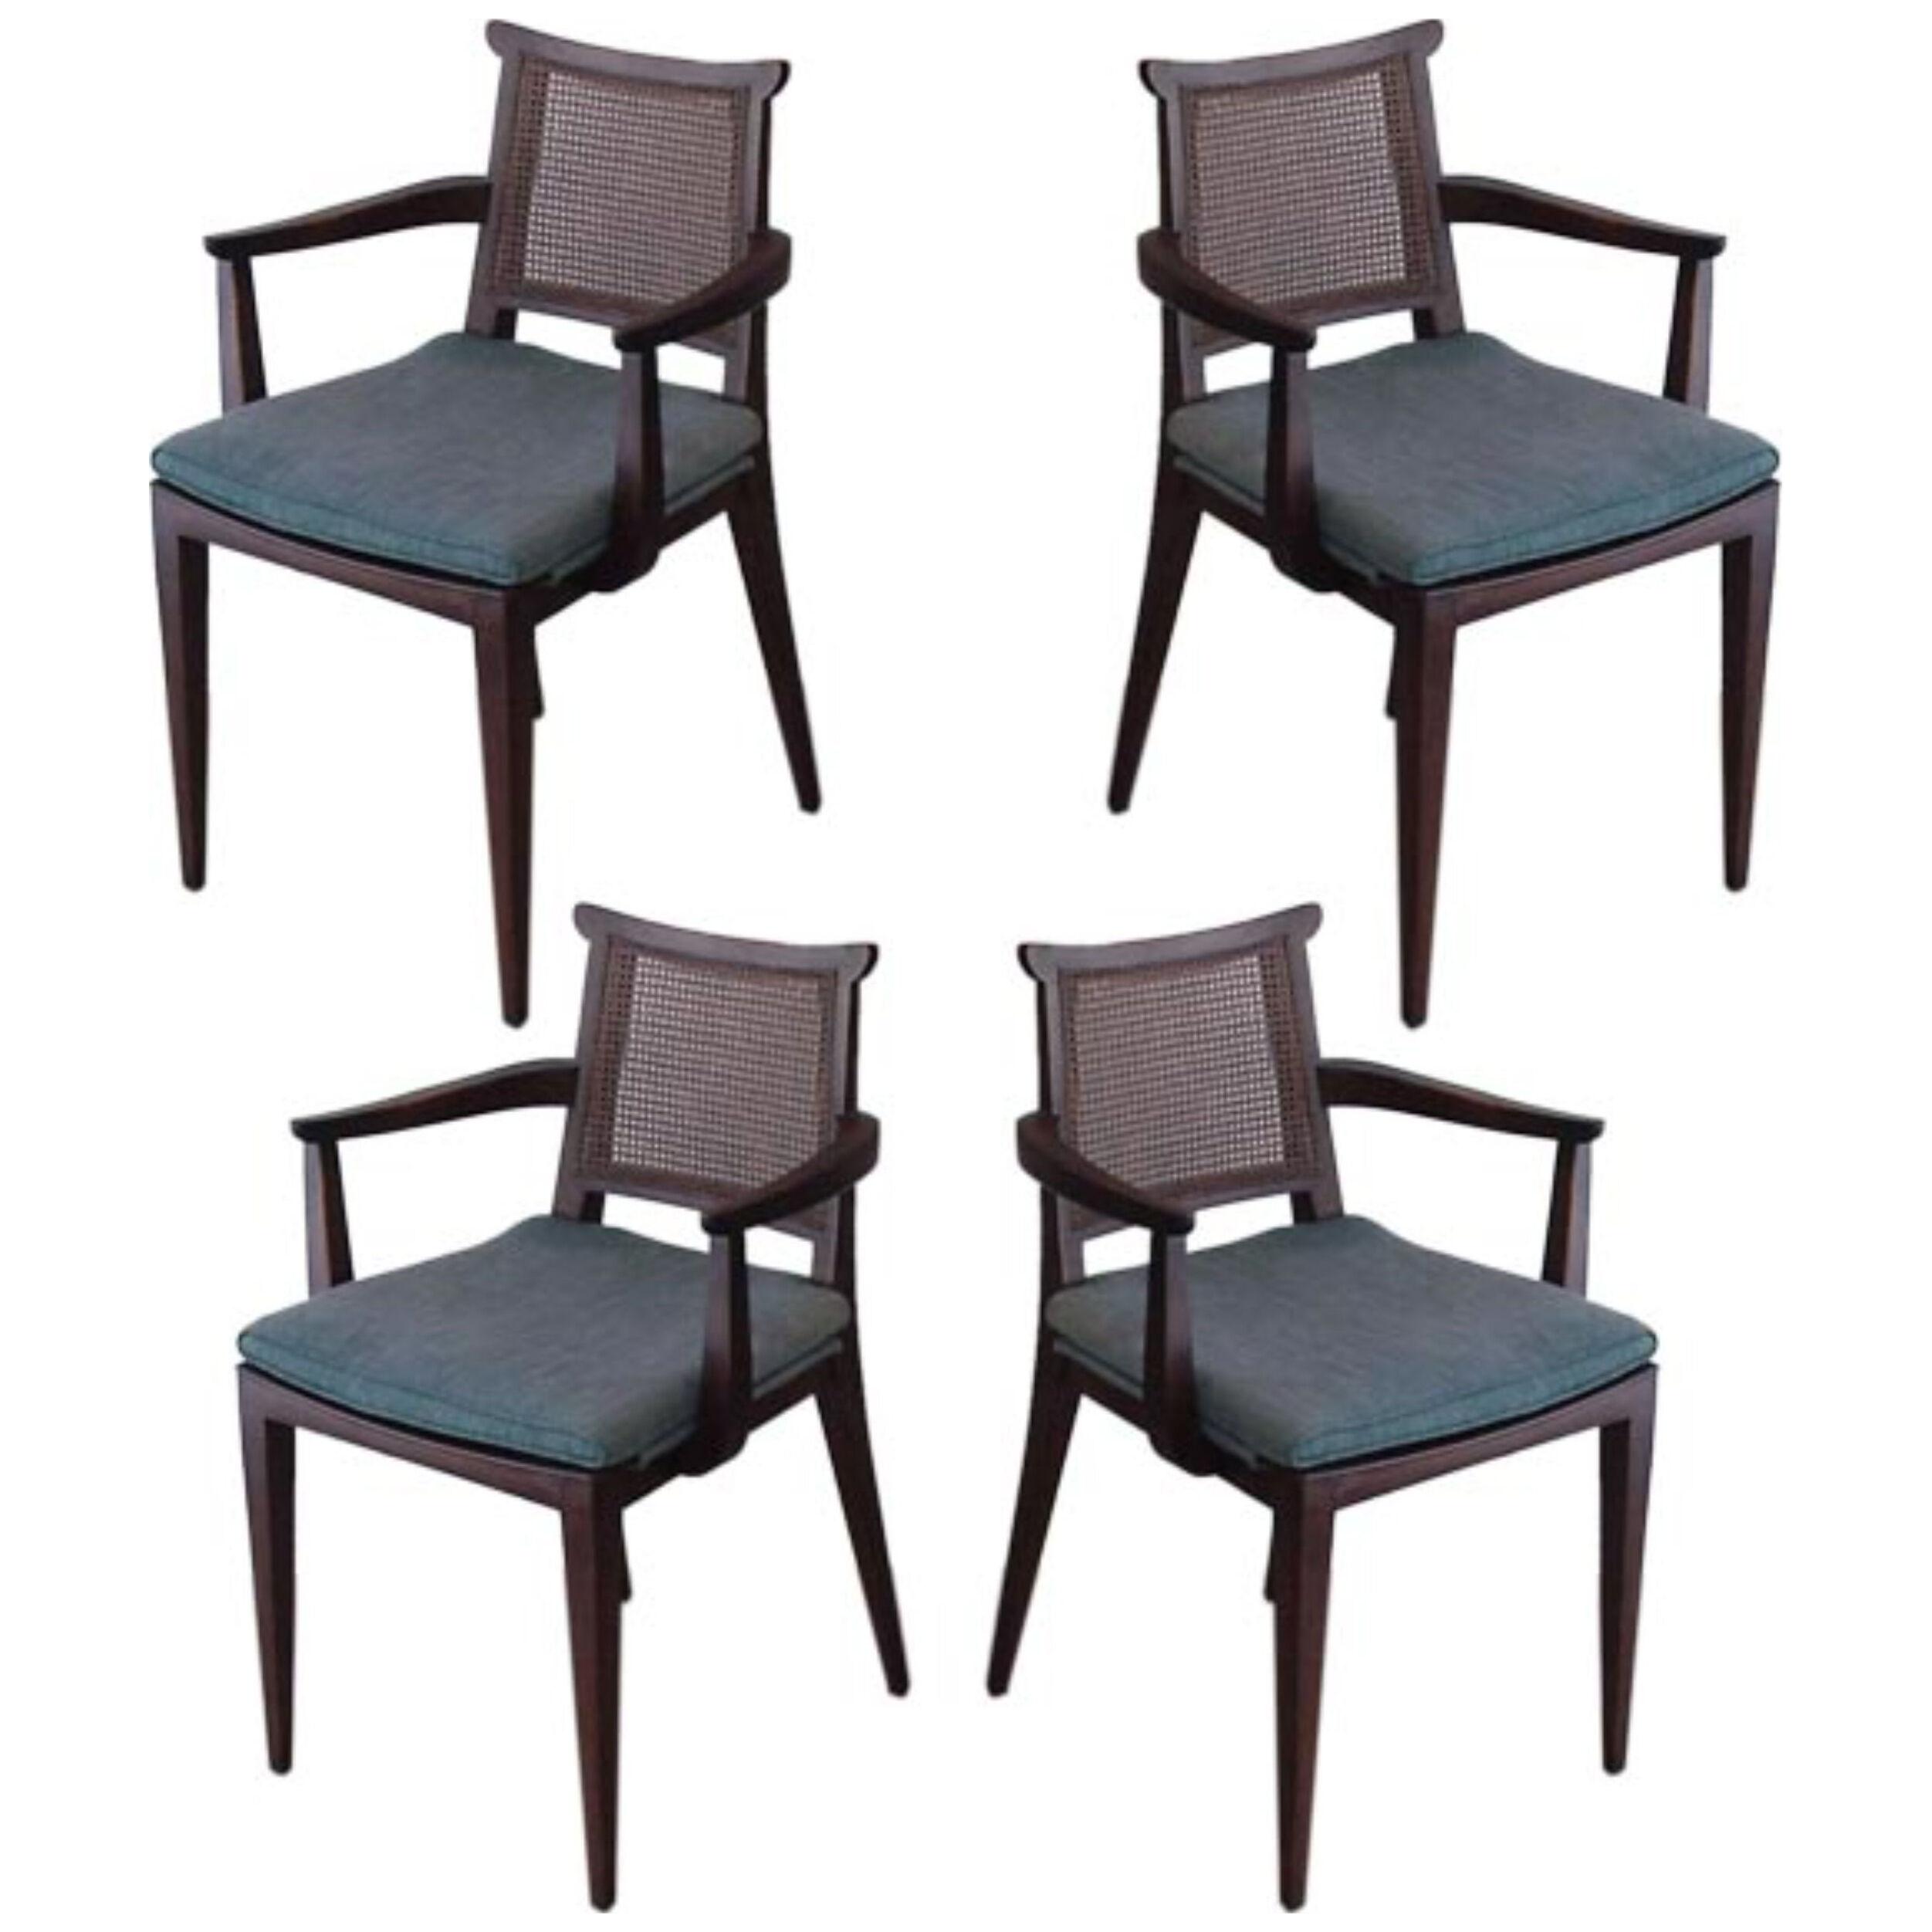 Set of Four Gaming Chairs by Edward Wormley for Dunbar